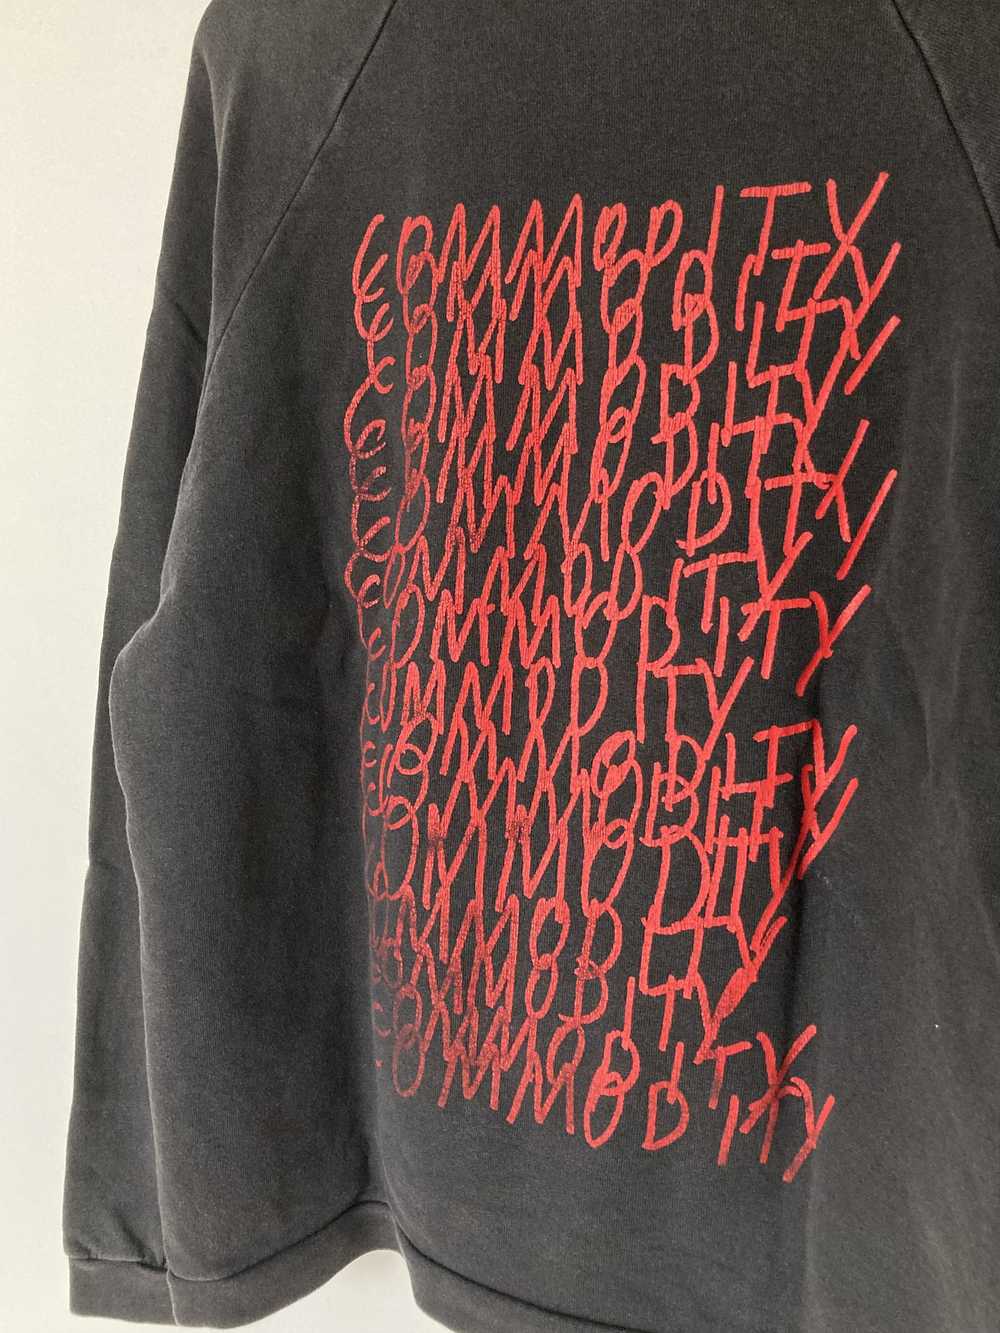 Raf Simons Raf SS03 Consumed "Commodity" sweater - image 4